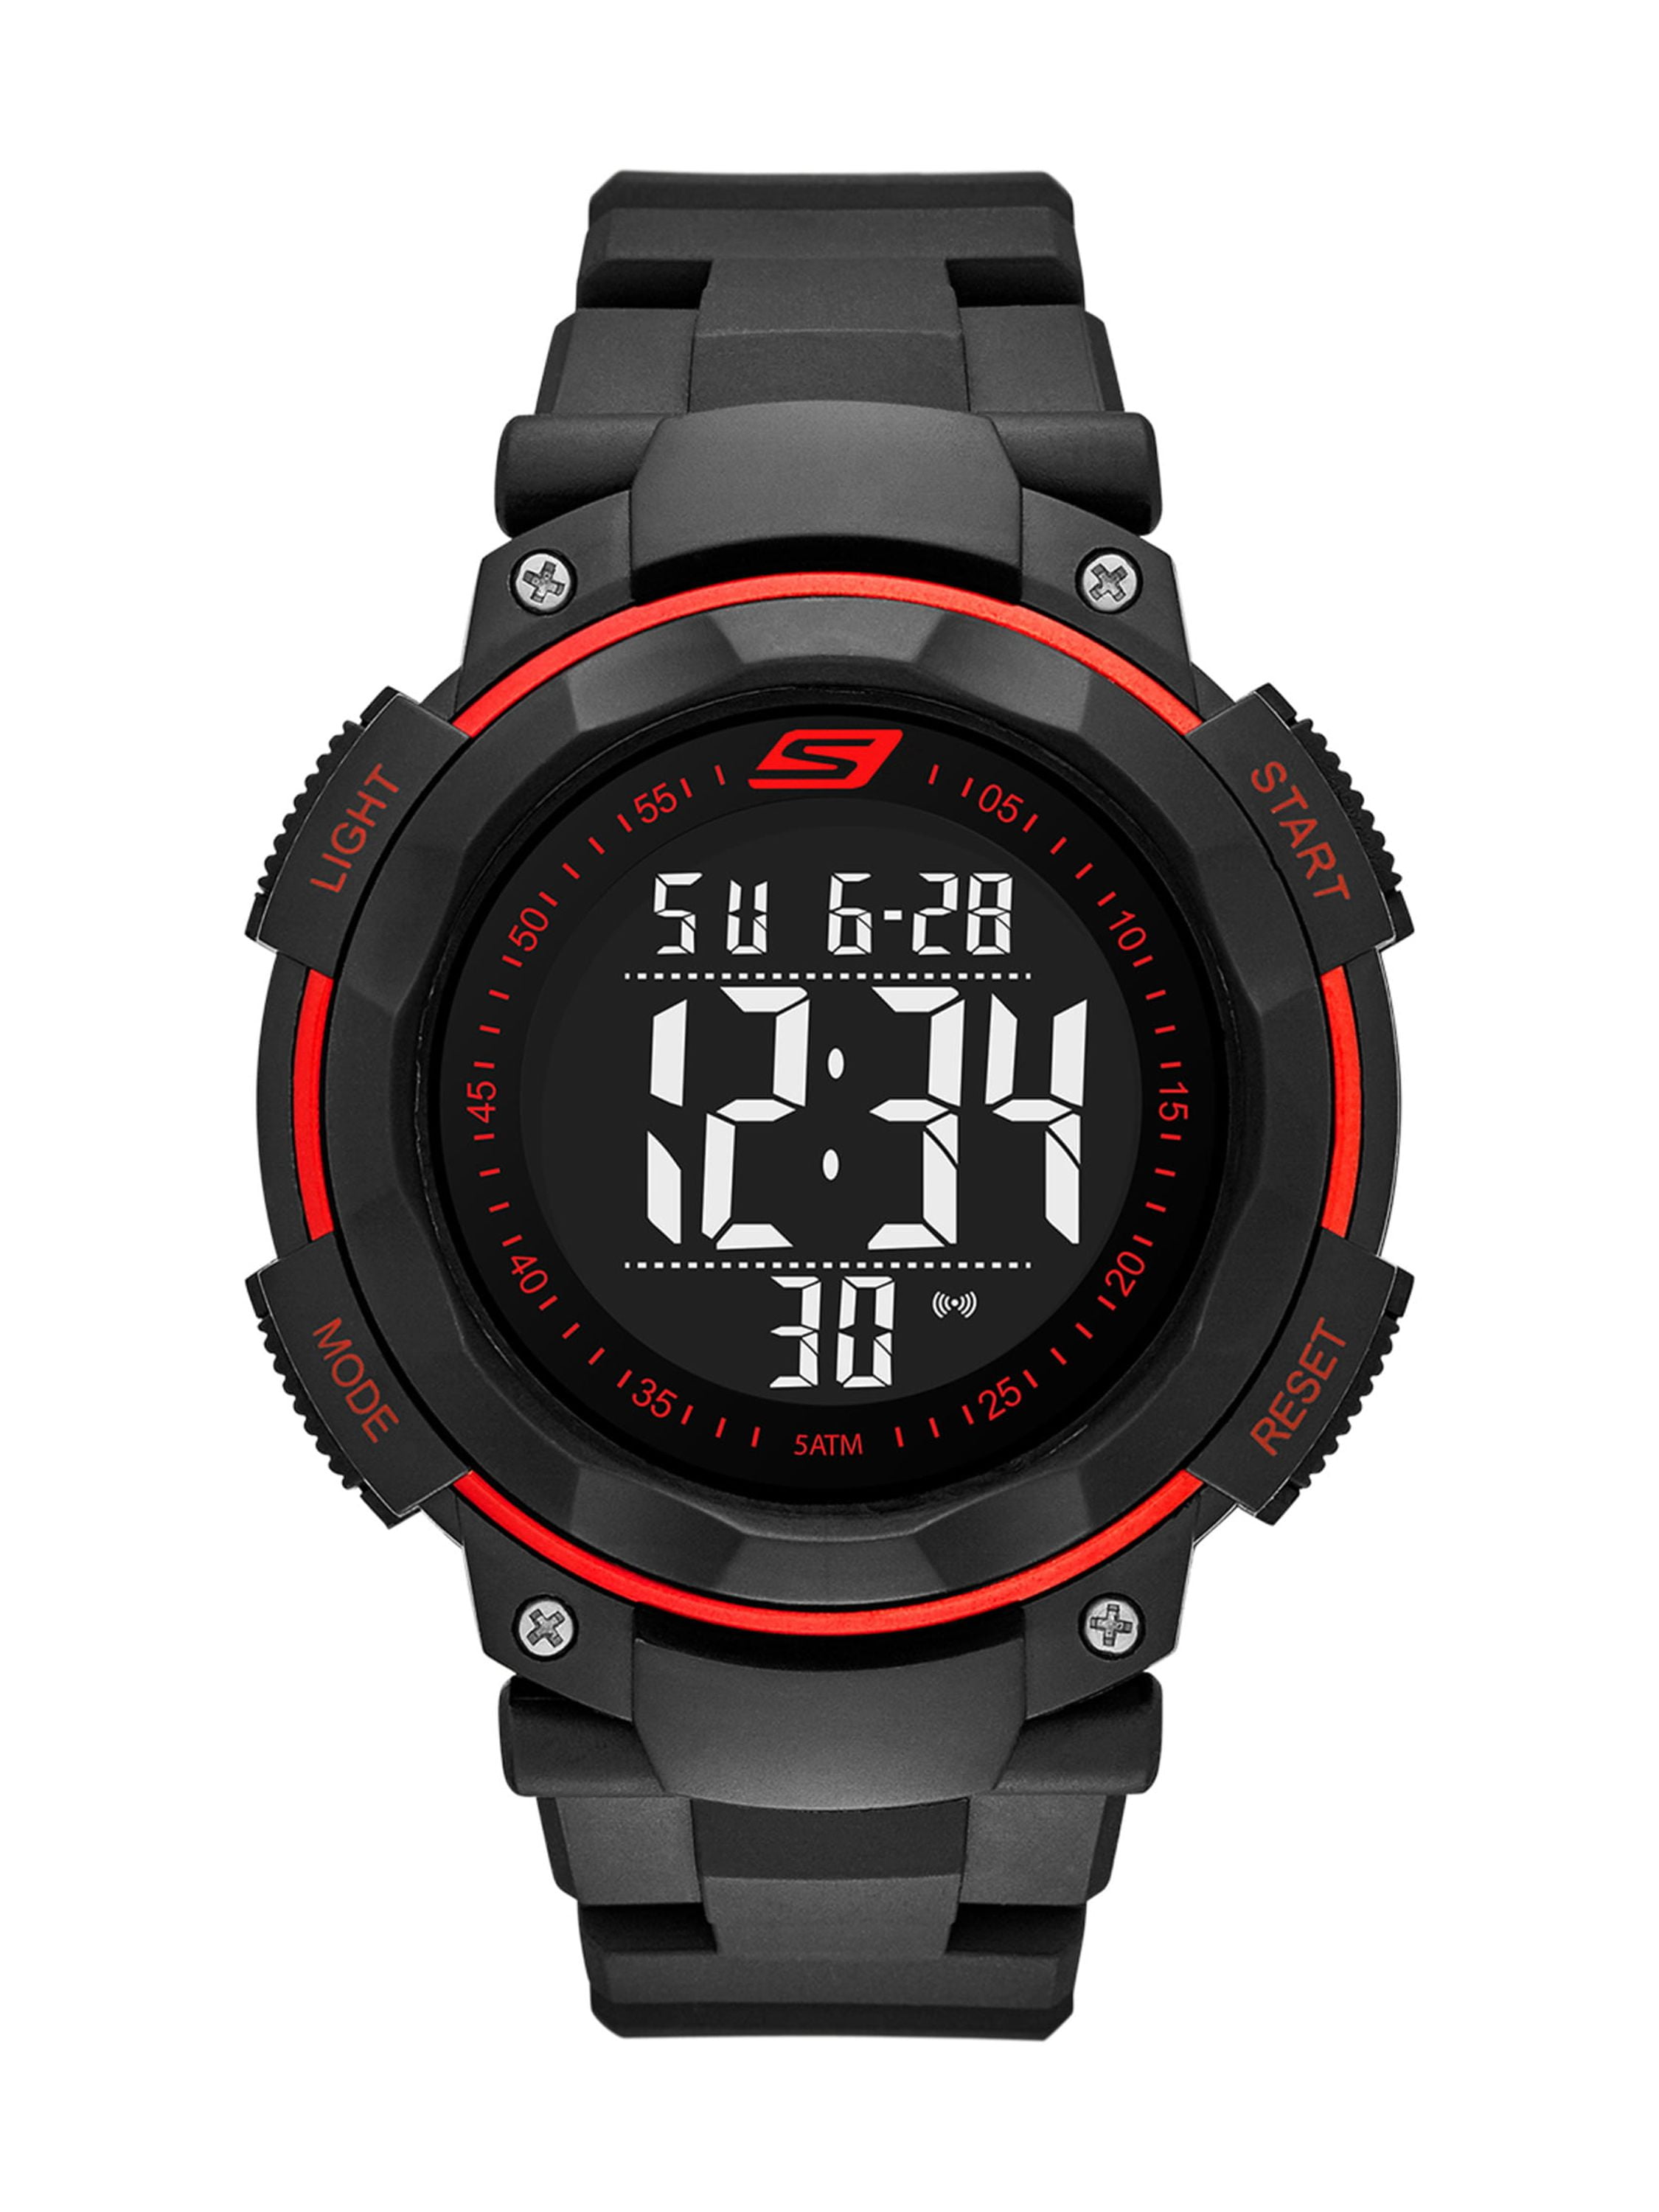 Skechers Ruhland 45MM Sport Digital Chronograph Watch with Plastic Strap  and Case, Black and Red